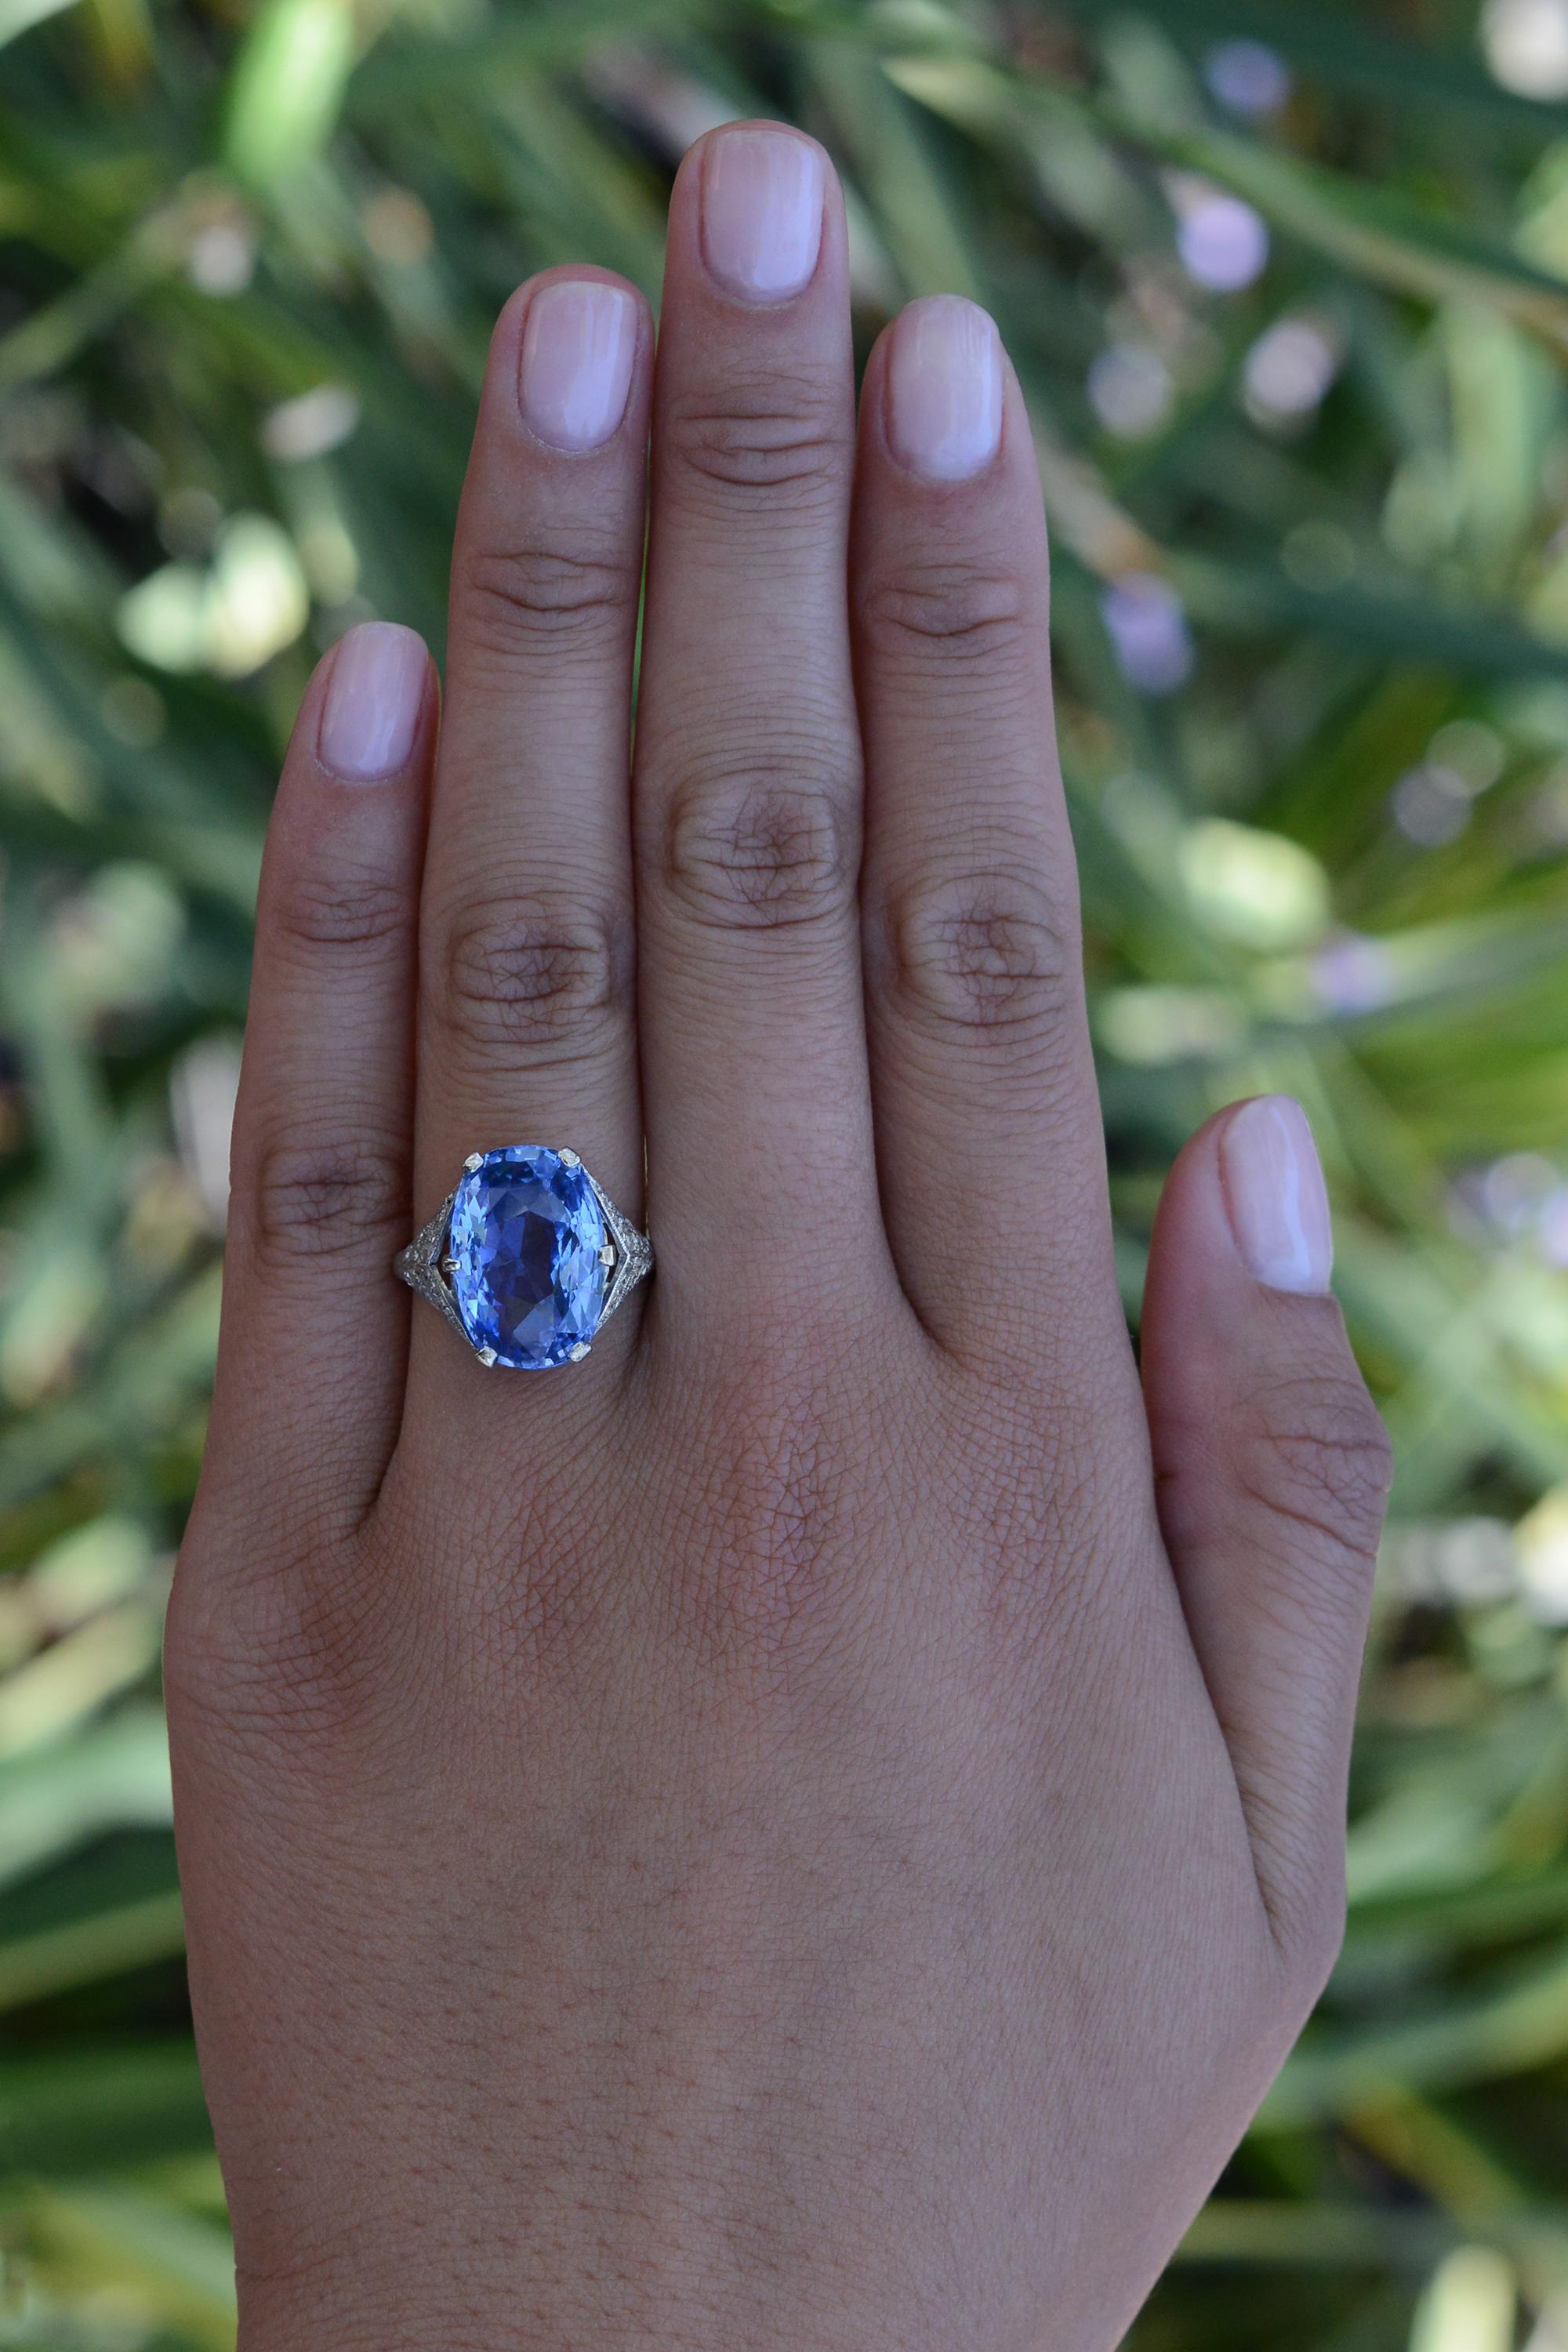 Lay witness to the jaw dropping beauty of this GIA certified antique sapphire Art Deco ring, a timeless treasure from the jazz age of the 1920s. Crafted of platinum, this artifact of high jewelry features a radiant oval faceted sapphire, sure to